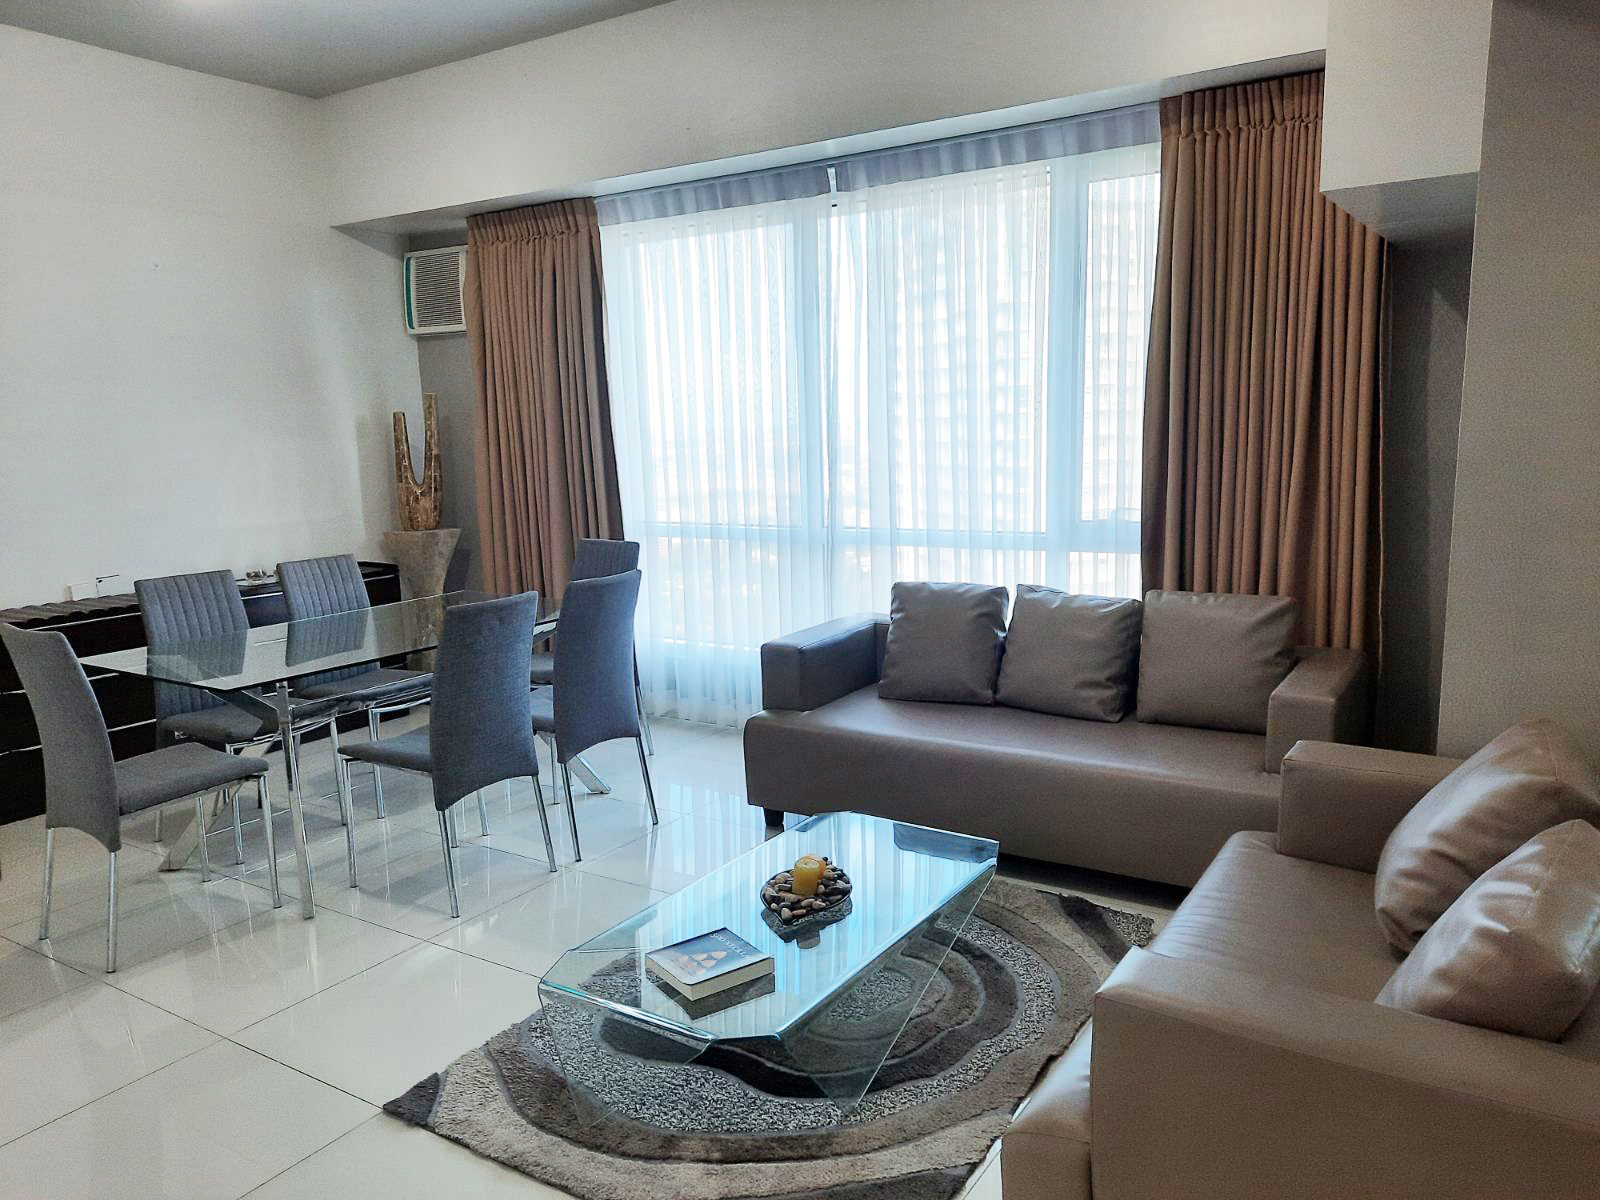 FOR SALE | 2BR CONDO PLUS MAIDS QTR + PARKING AT MARCO POLO RESIDENCES TOWER 1